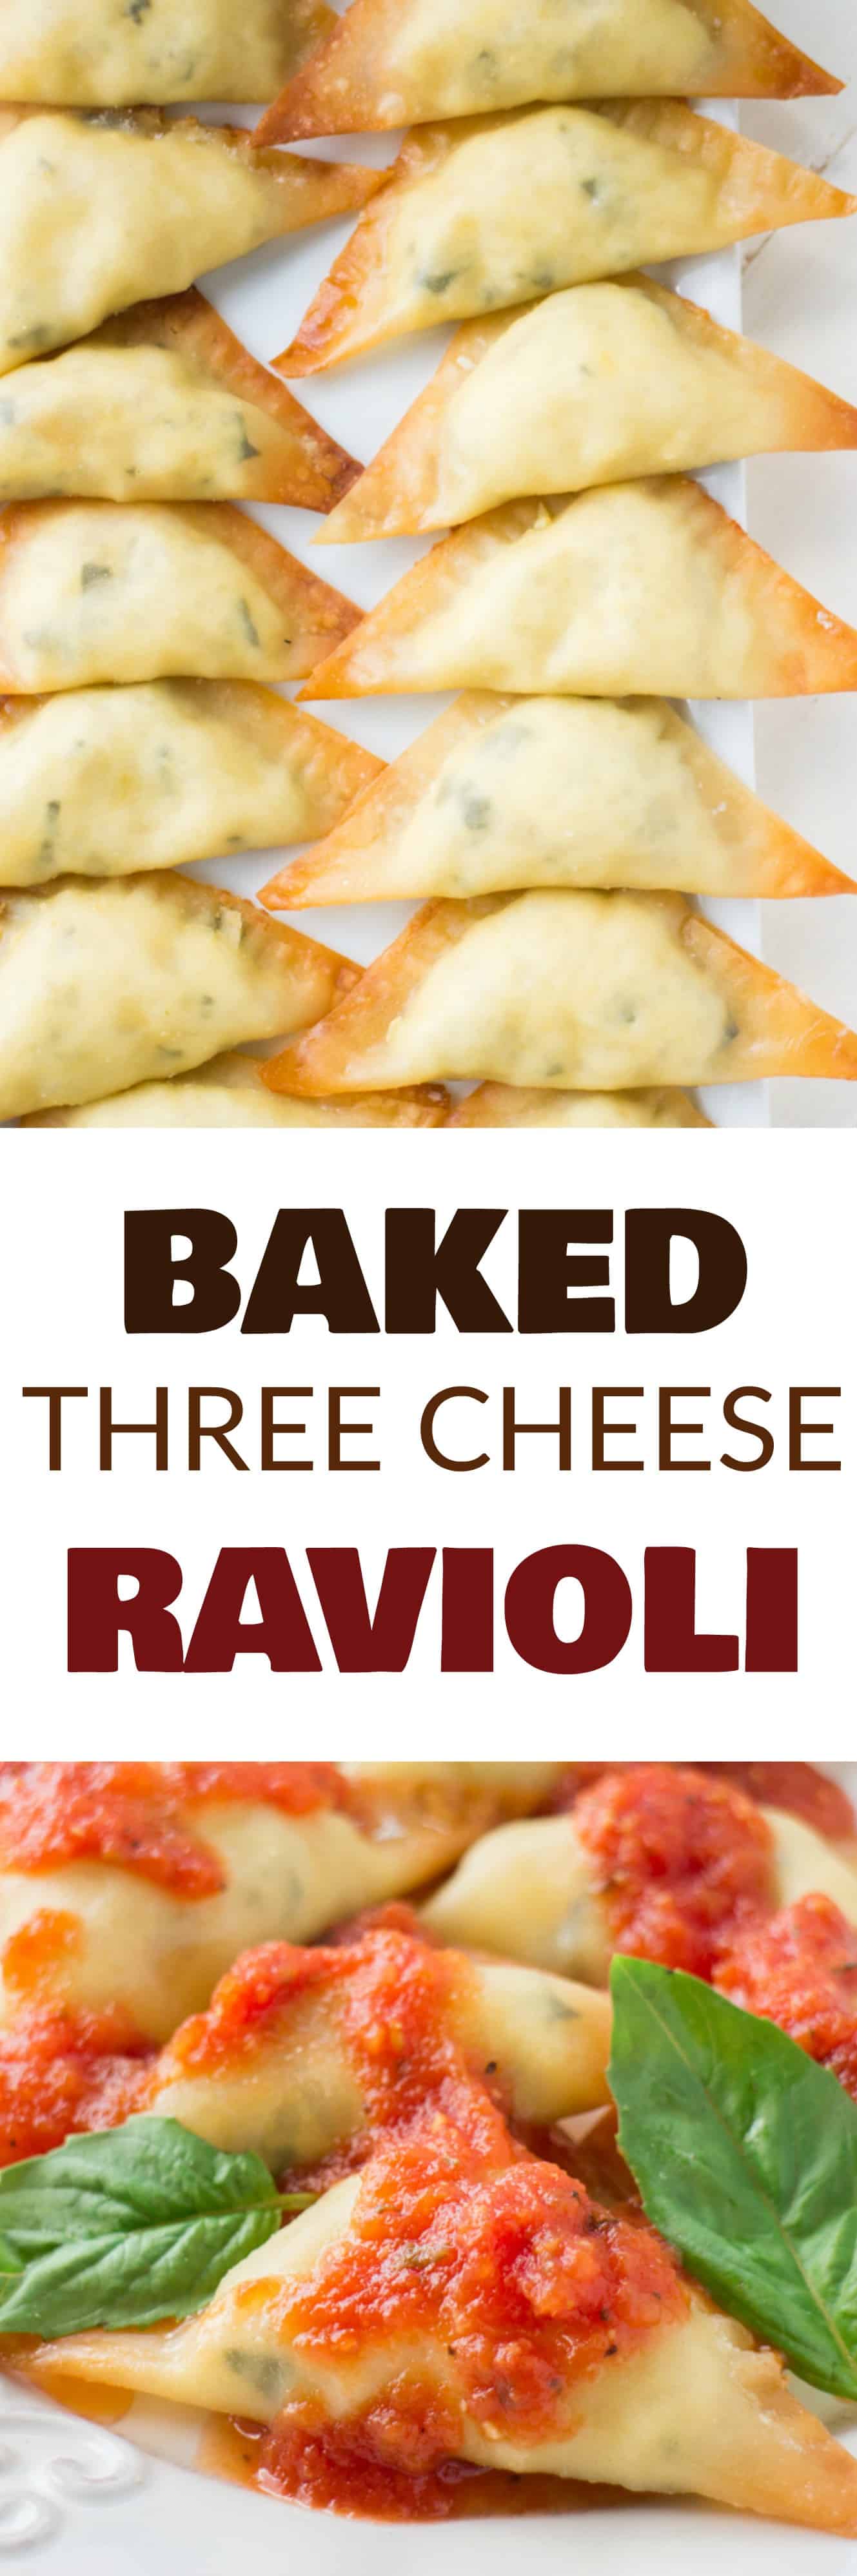 EASY BAKED Three Cheese Ravioli is one of my family's favorite meals! This homemade recipe uses wonton wrappers for the ravioli to make it faster and is filled with ricotta, mozzarella and Parmesan cheese! Instructions include how to make and bake immediately or freeze for frozen ravioli. 